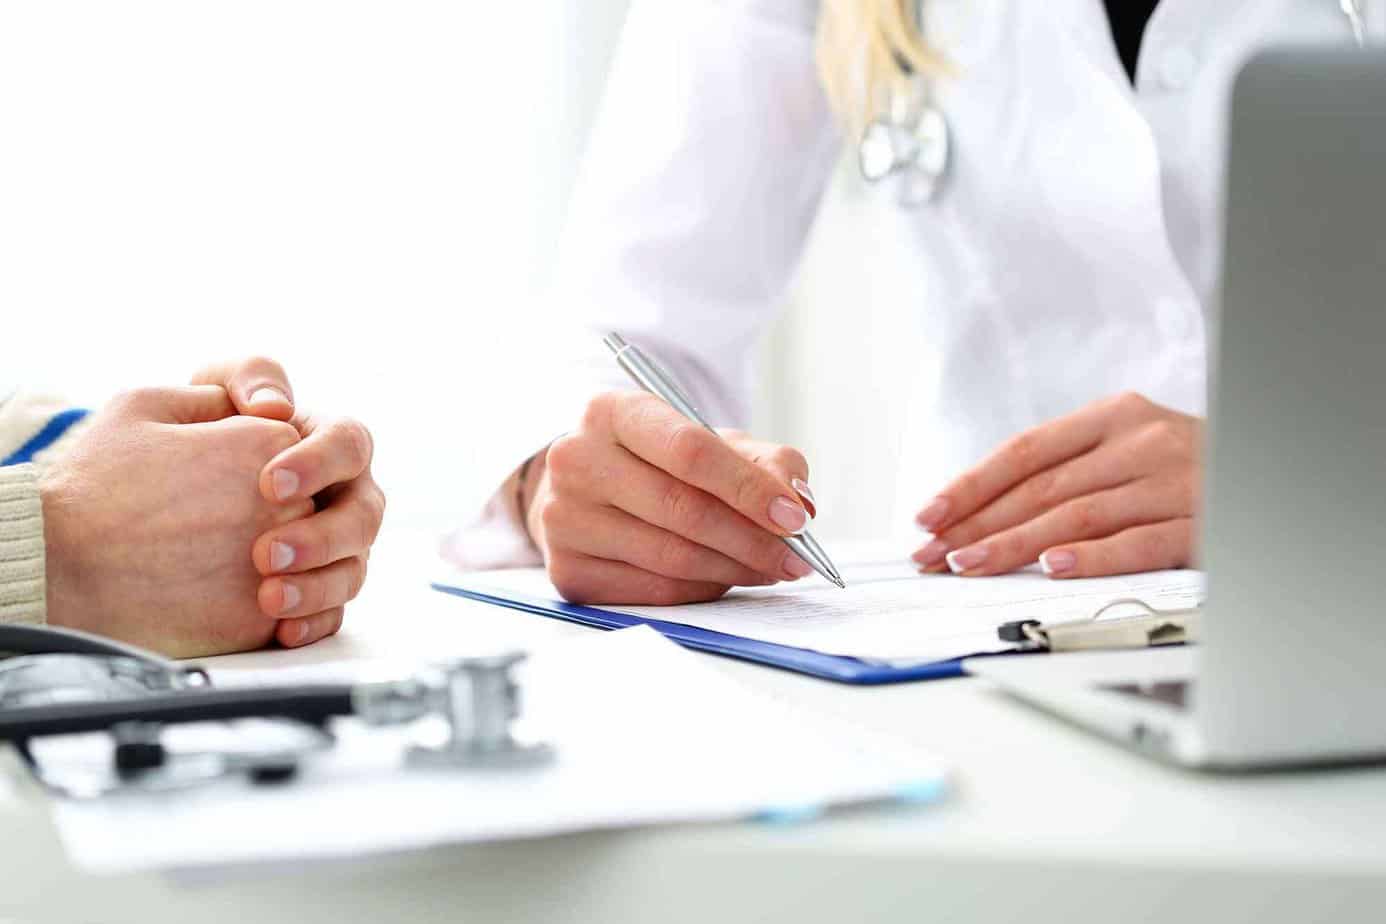 The hands of a doctor and patient reviewing medical paperwork and discussing medication assisted treatment